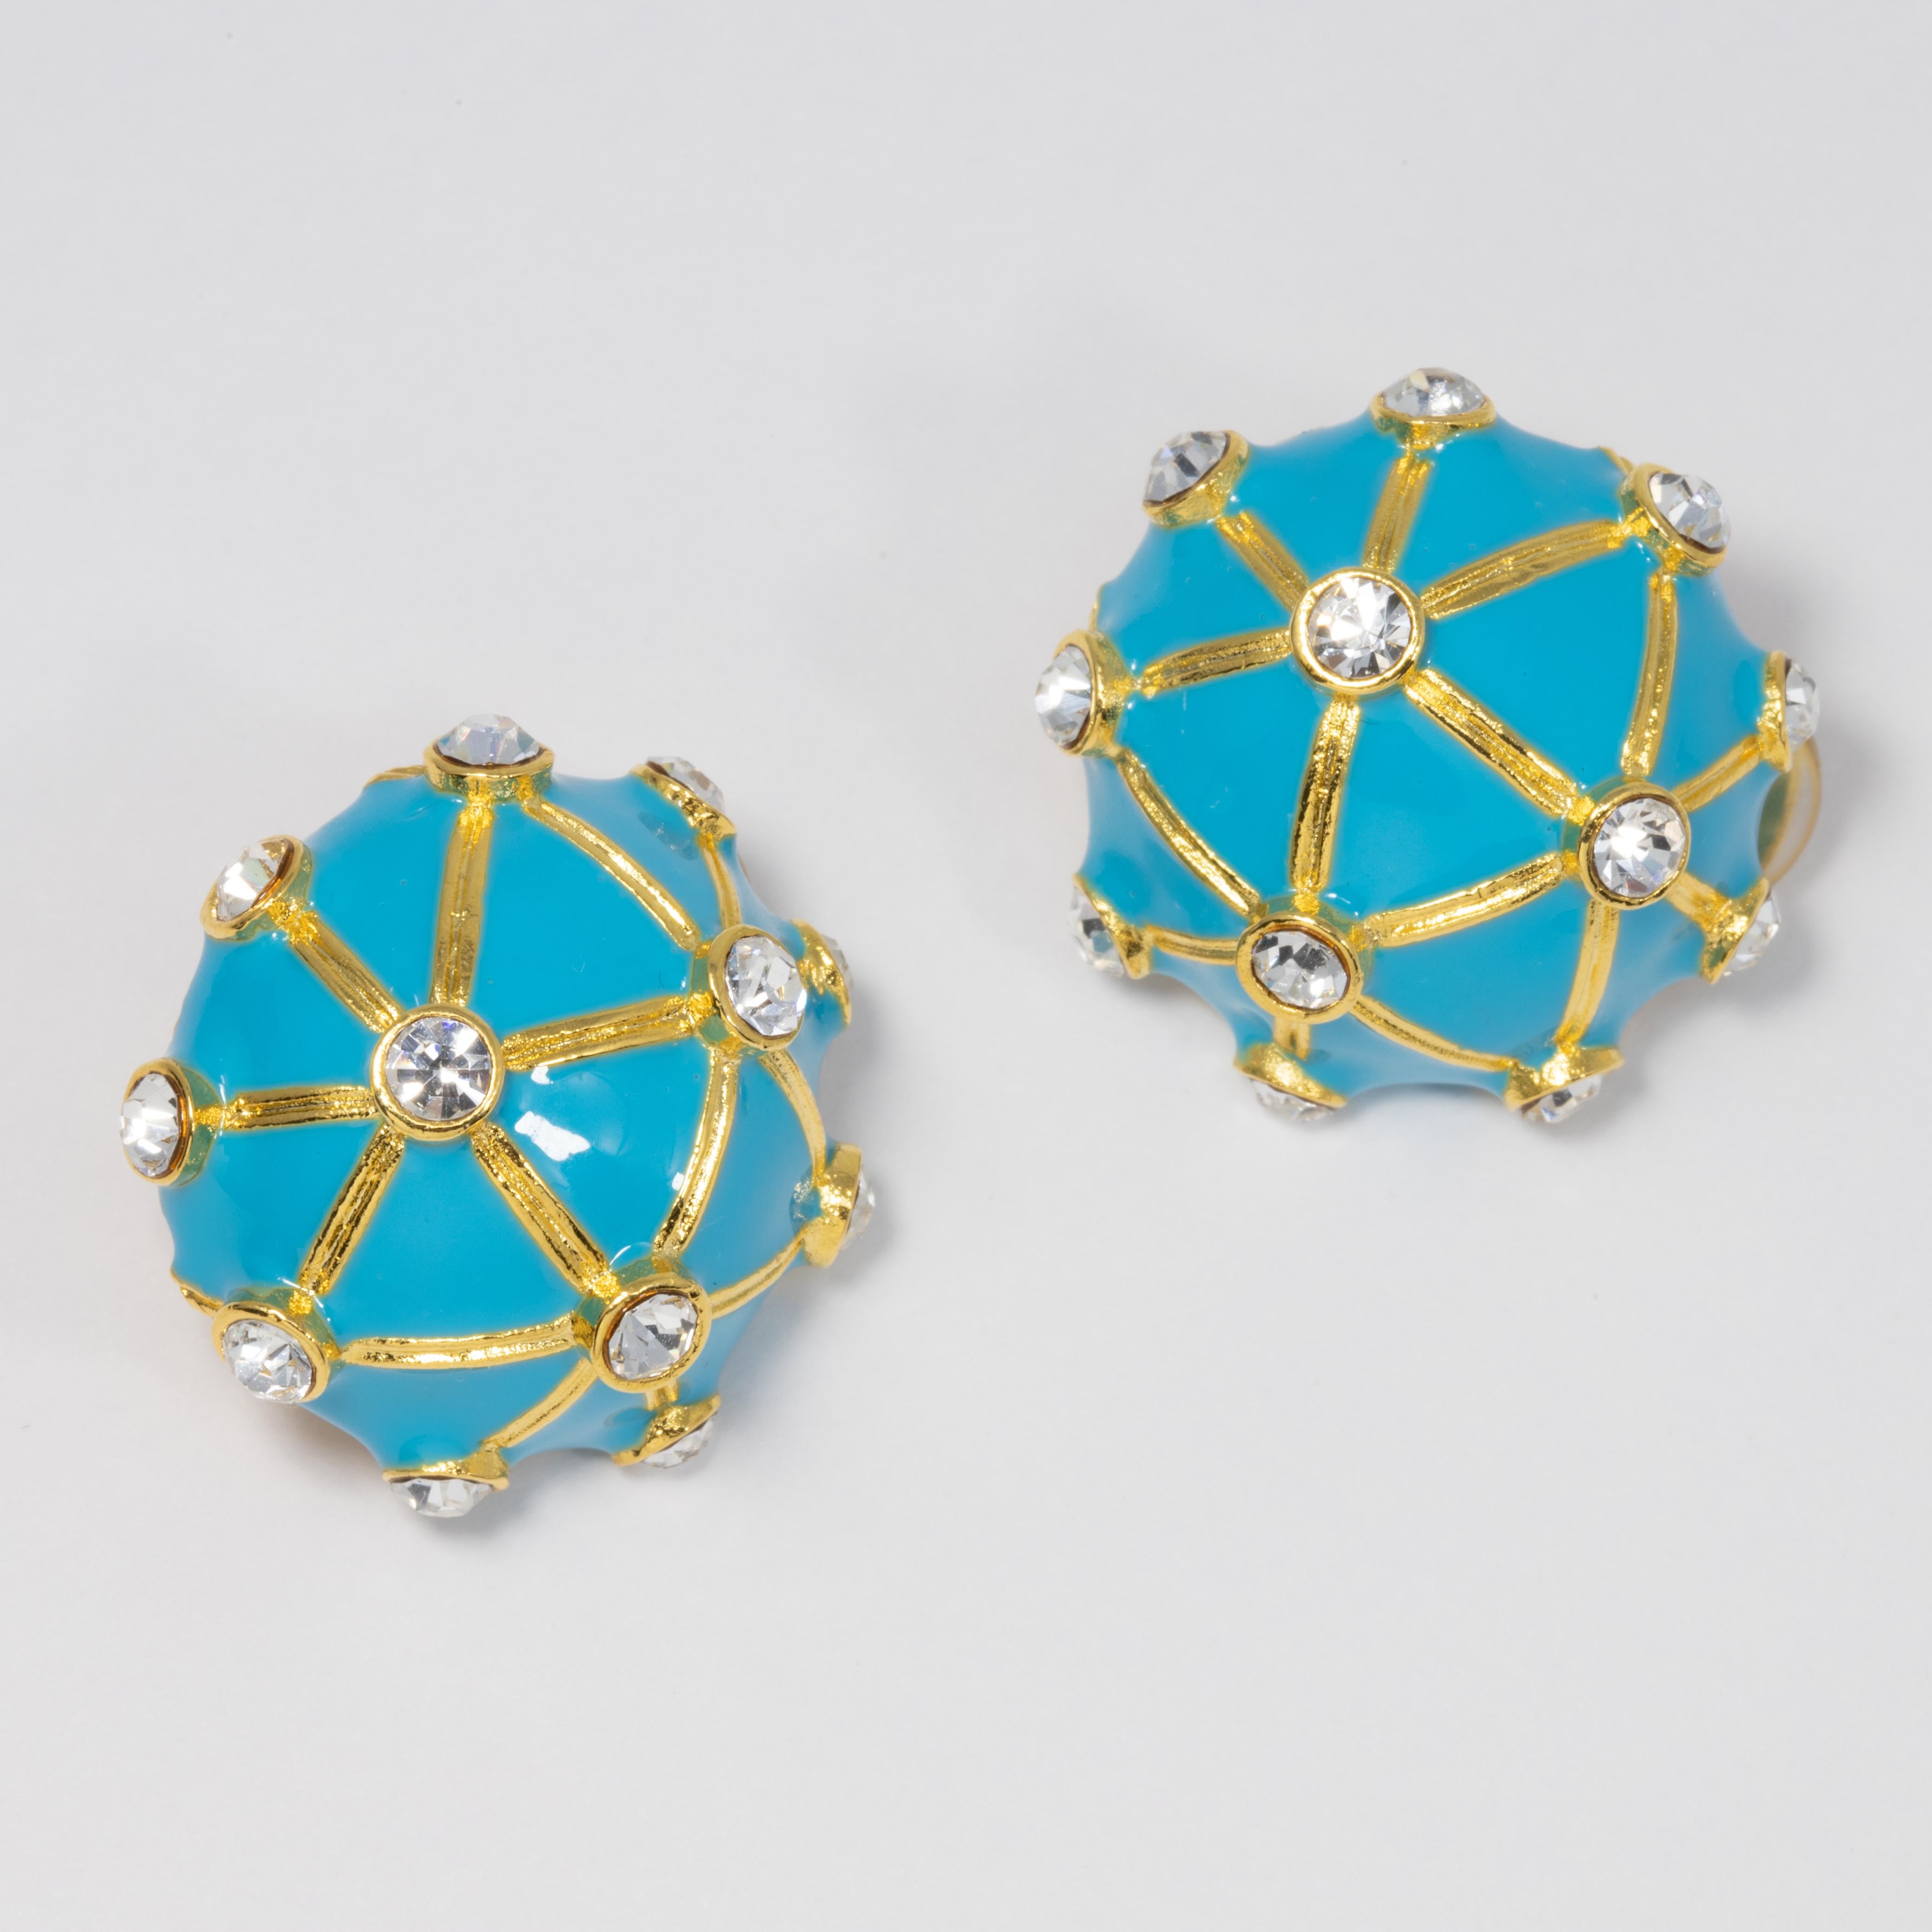 Stylish Kenneth Jay Lane earrings, featuring clear crystals set in a turquoise enamel gold-accented round clip on earrings

Hallmarks: KJL, Made in USA